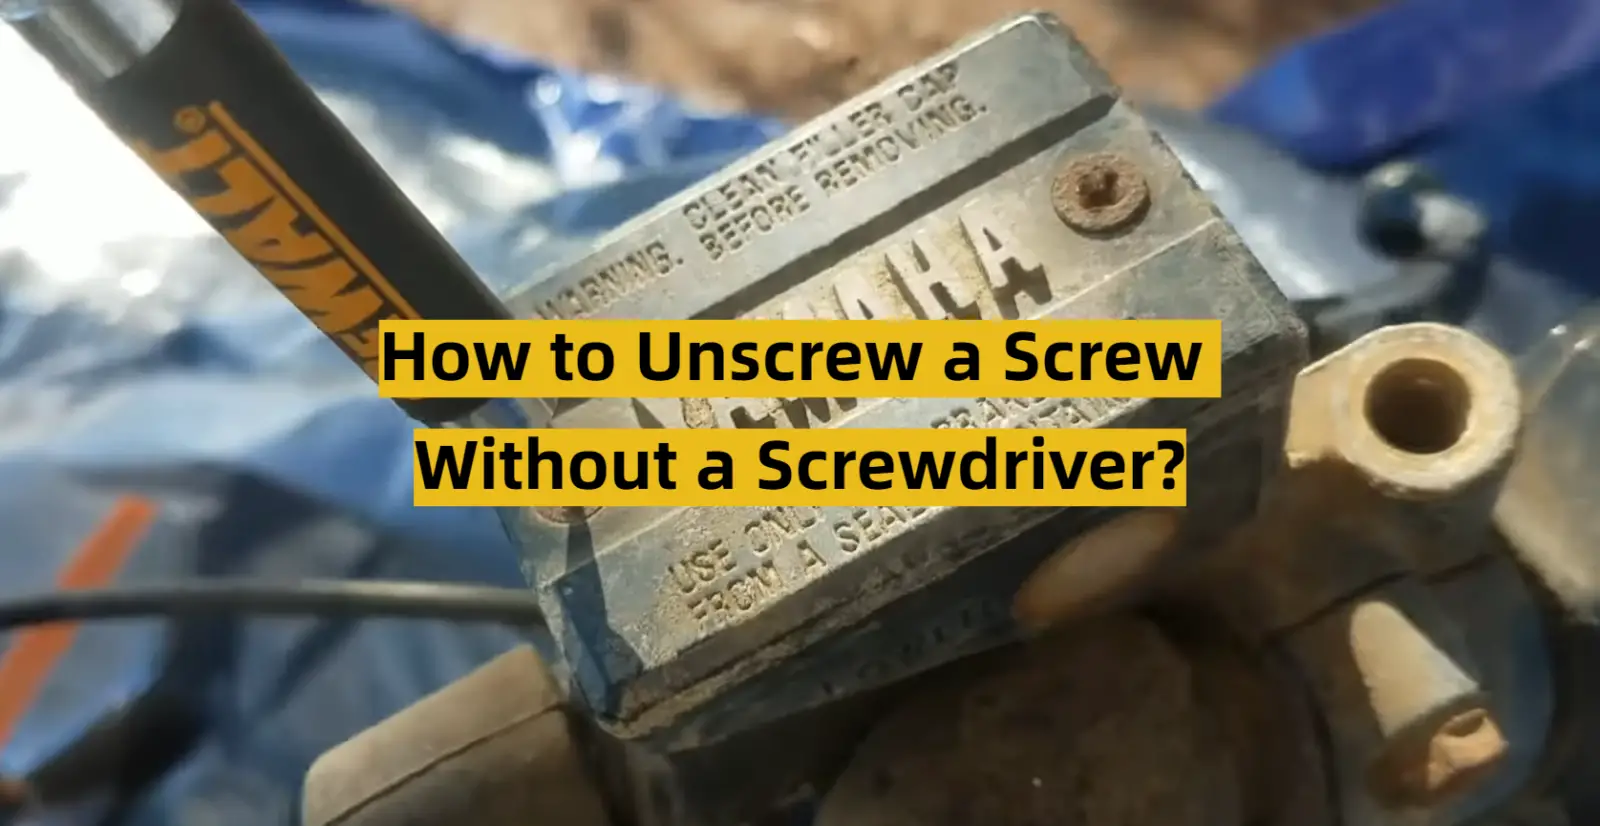 How to Unscrew a Screw Without a Screwdriver?